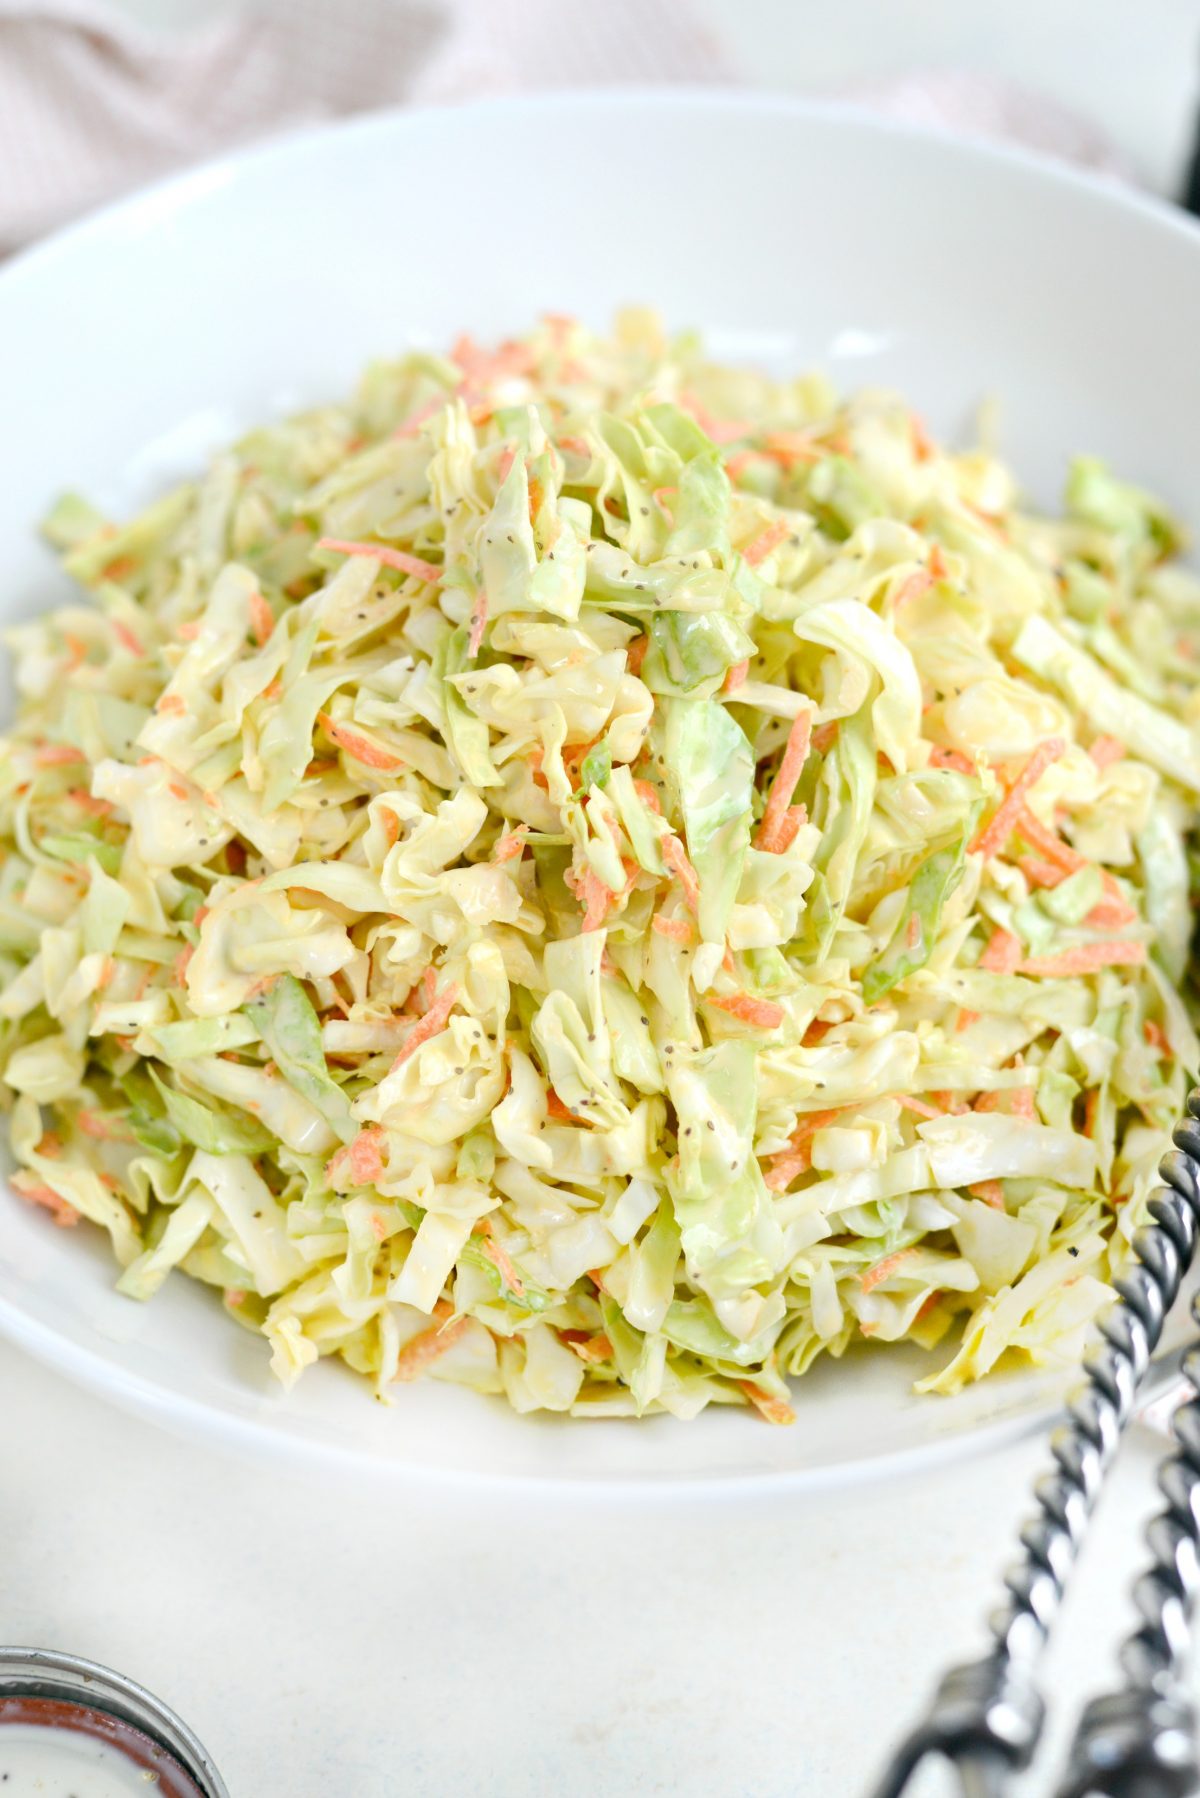 Classic Coleslaw Recipe with Homemade Dressing l SimplyScratch.com (11)